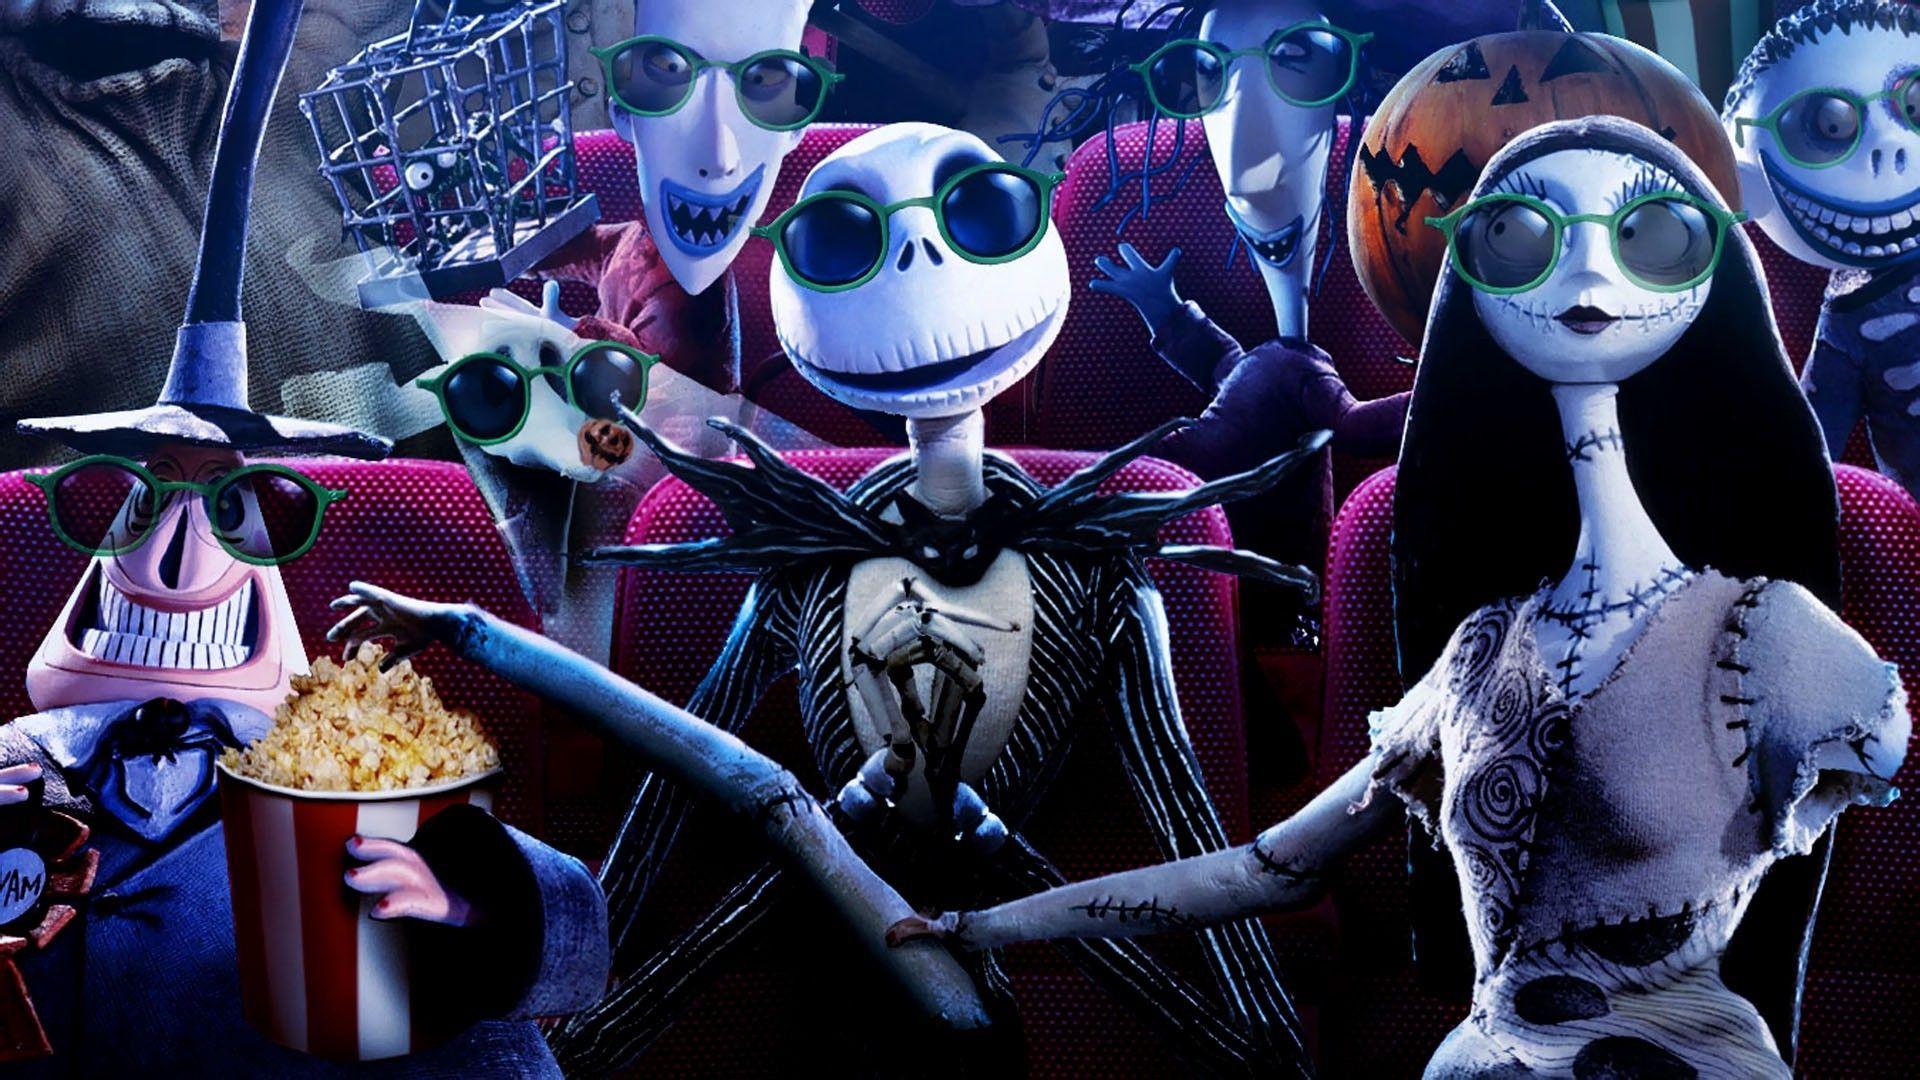 Nightmare Before Christmas Wallpapers 1920x1080 Image & Pictures